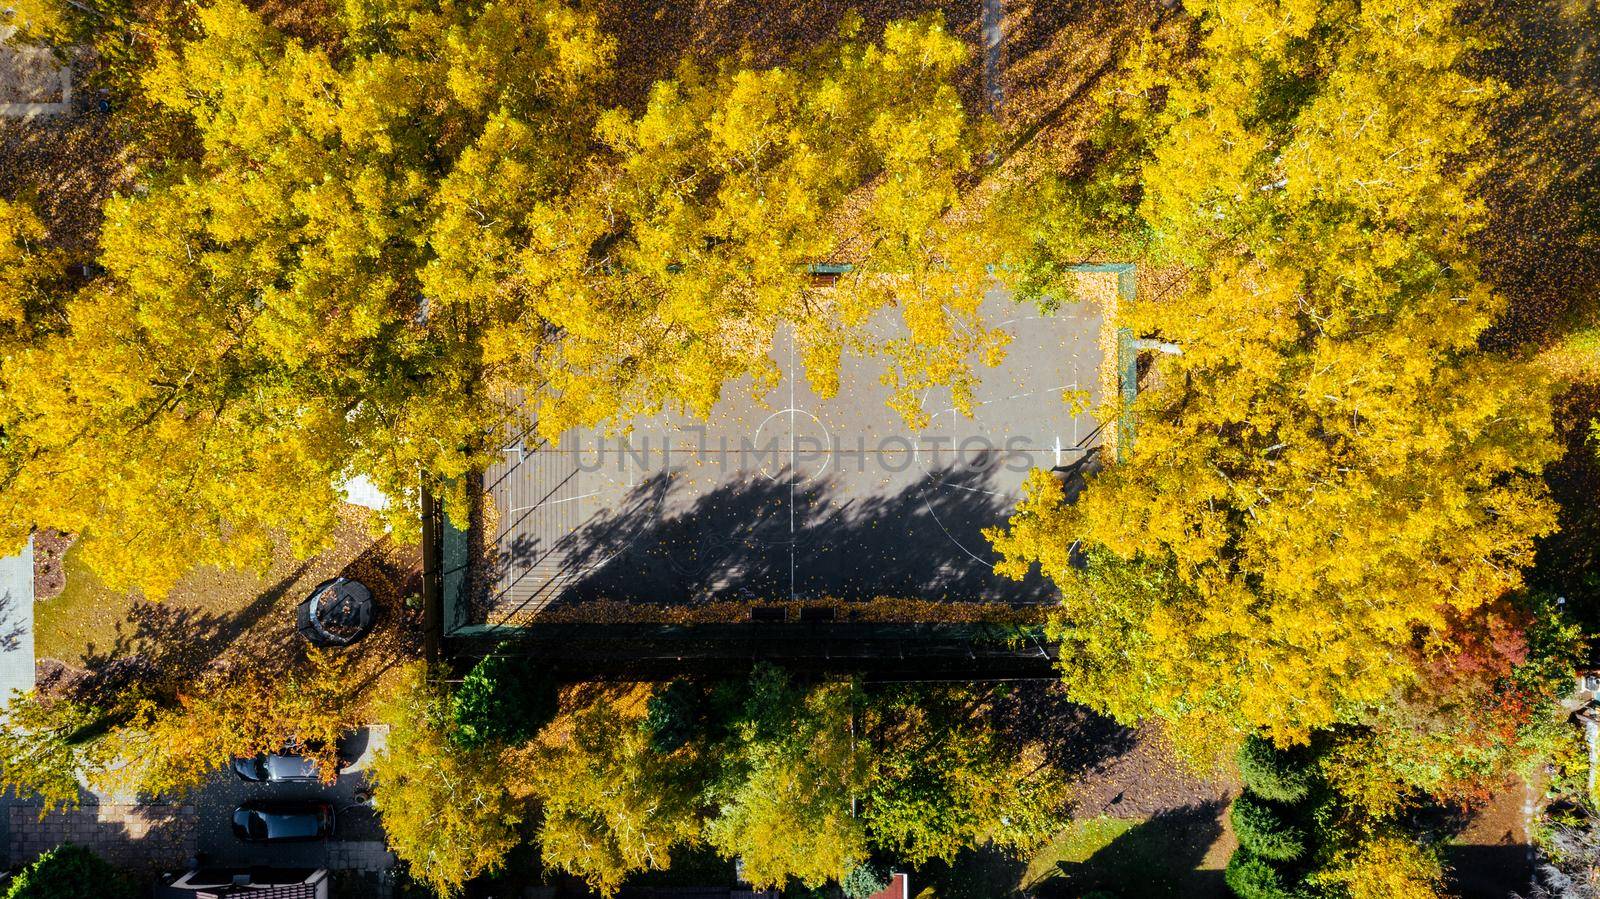 Aerial view of a basketball court, basketball court in autumn